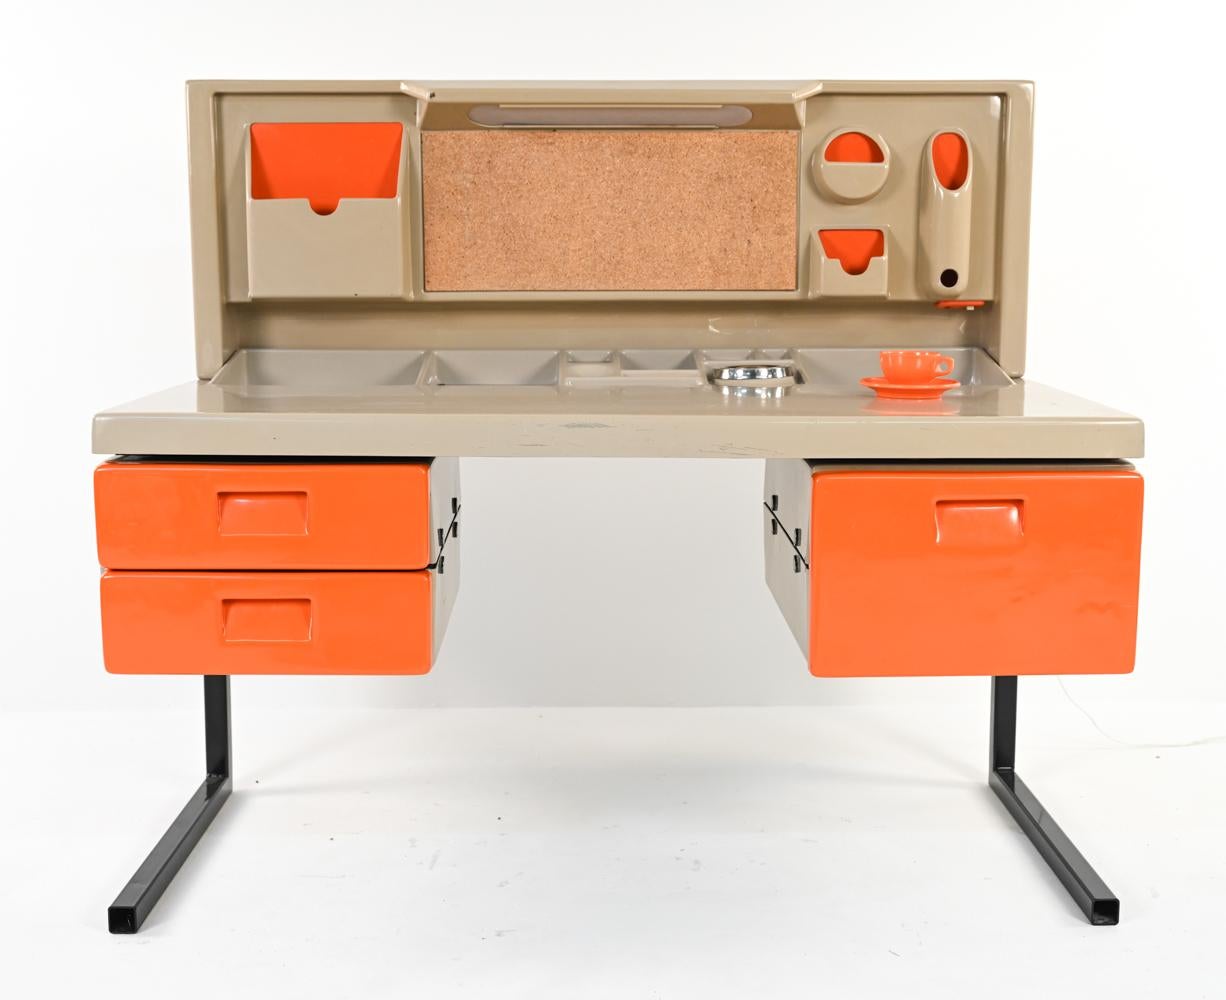 Rarely seen and even more rarely available Space-Age molded plastic desk manufactured by L'atelier, São Paulo, Brazil. Design attributed to Jorge Zalszupin a Polish naturalized Brazilian Architect, visionary designer & the founder of